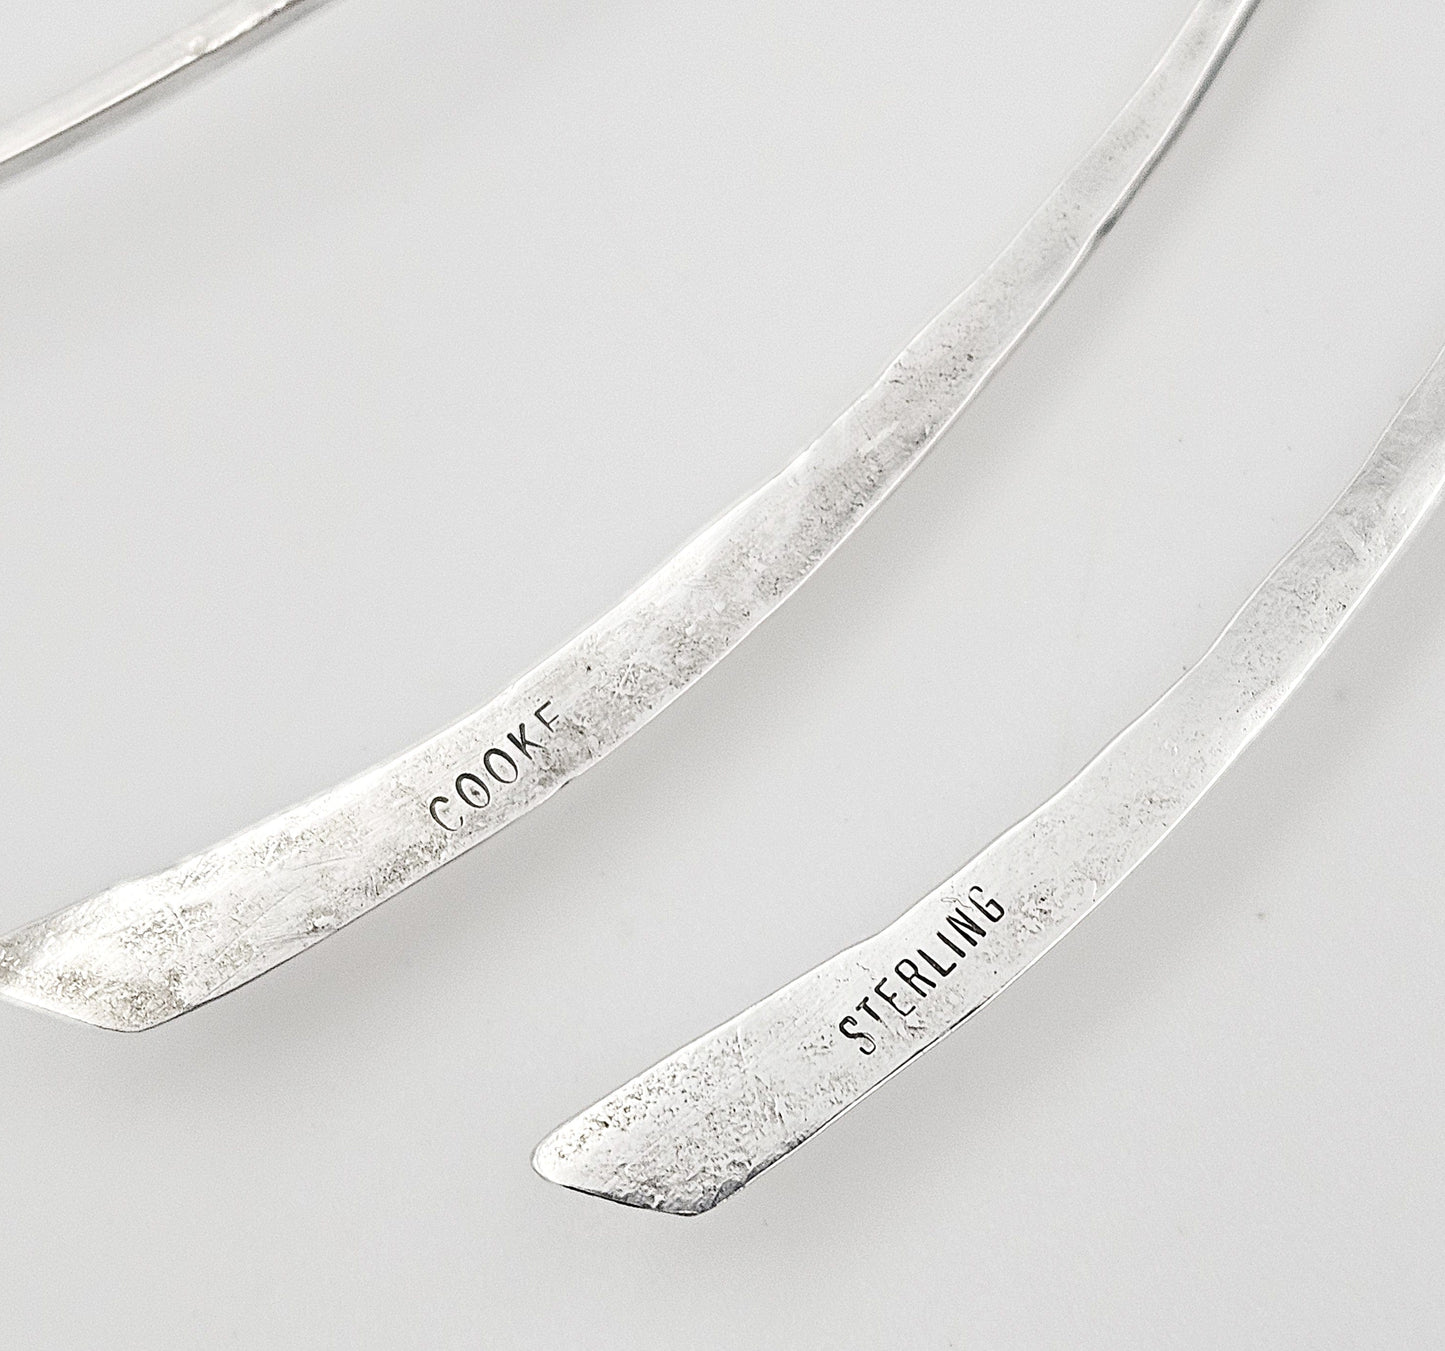 Betty Cooke Jewelry Superb US Designer Betty Cooke Modernist Sterling Silver Necklace Circa 1950's